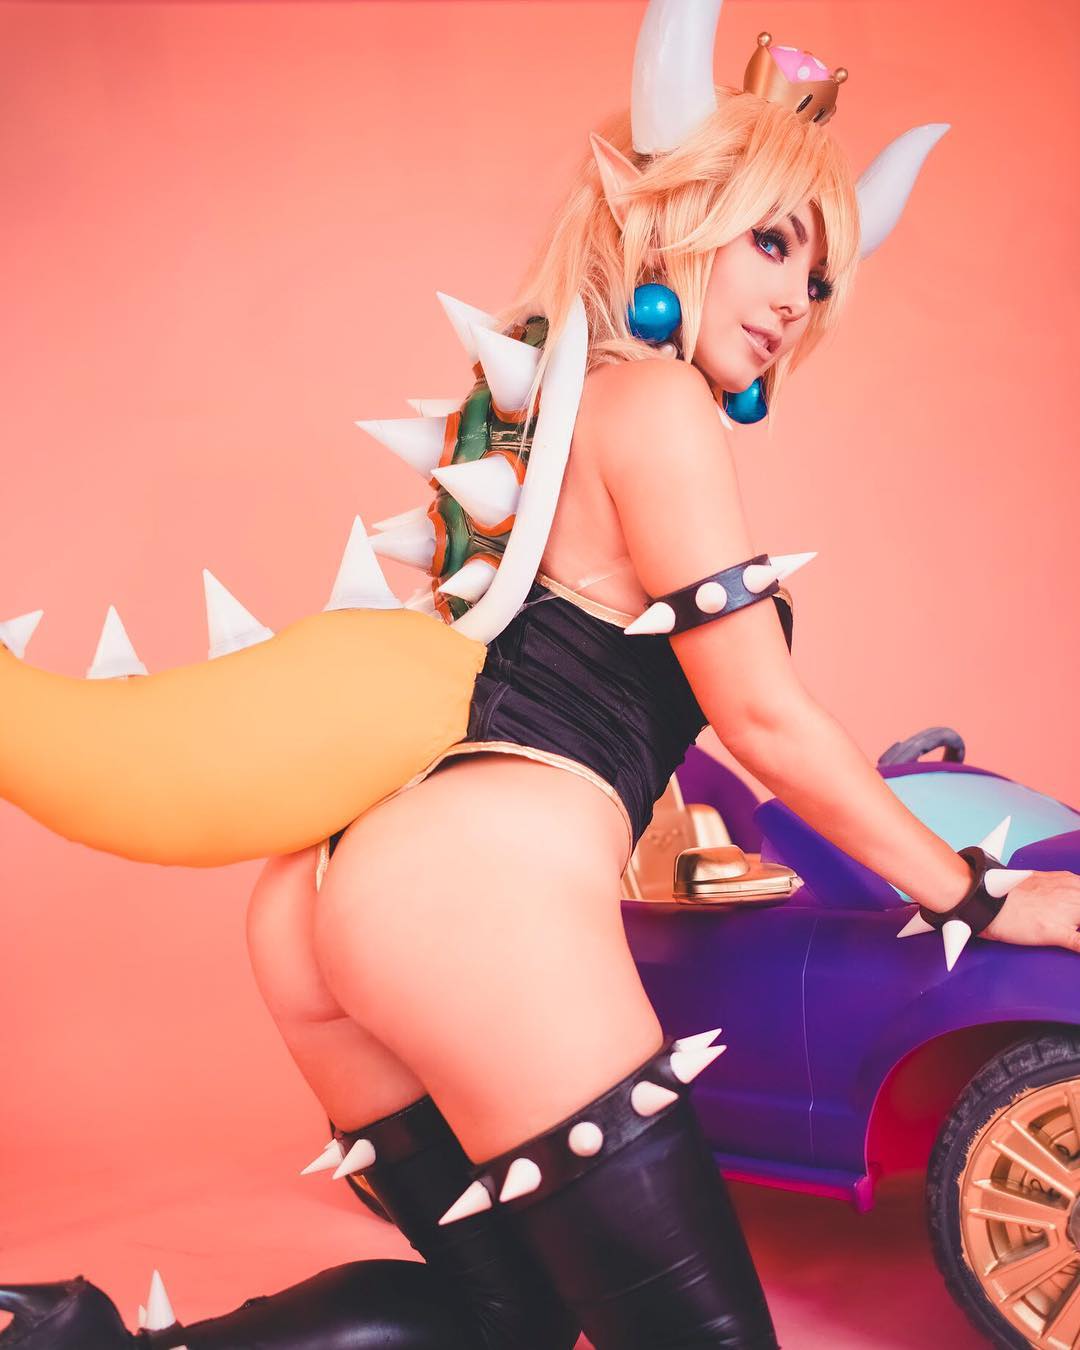 49 Hottest Jessica Nigri Bikini Pictures Prove That She Is One Of The Hottest Women Alive | Best Of Comic Books